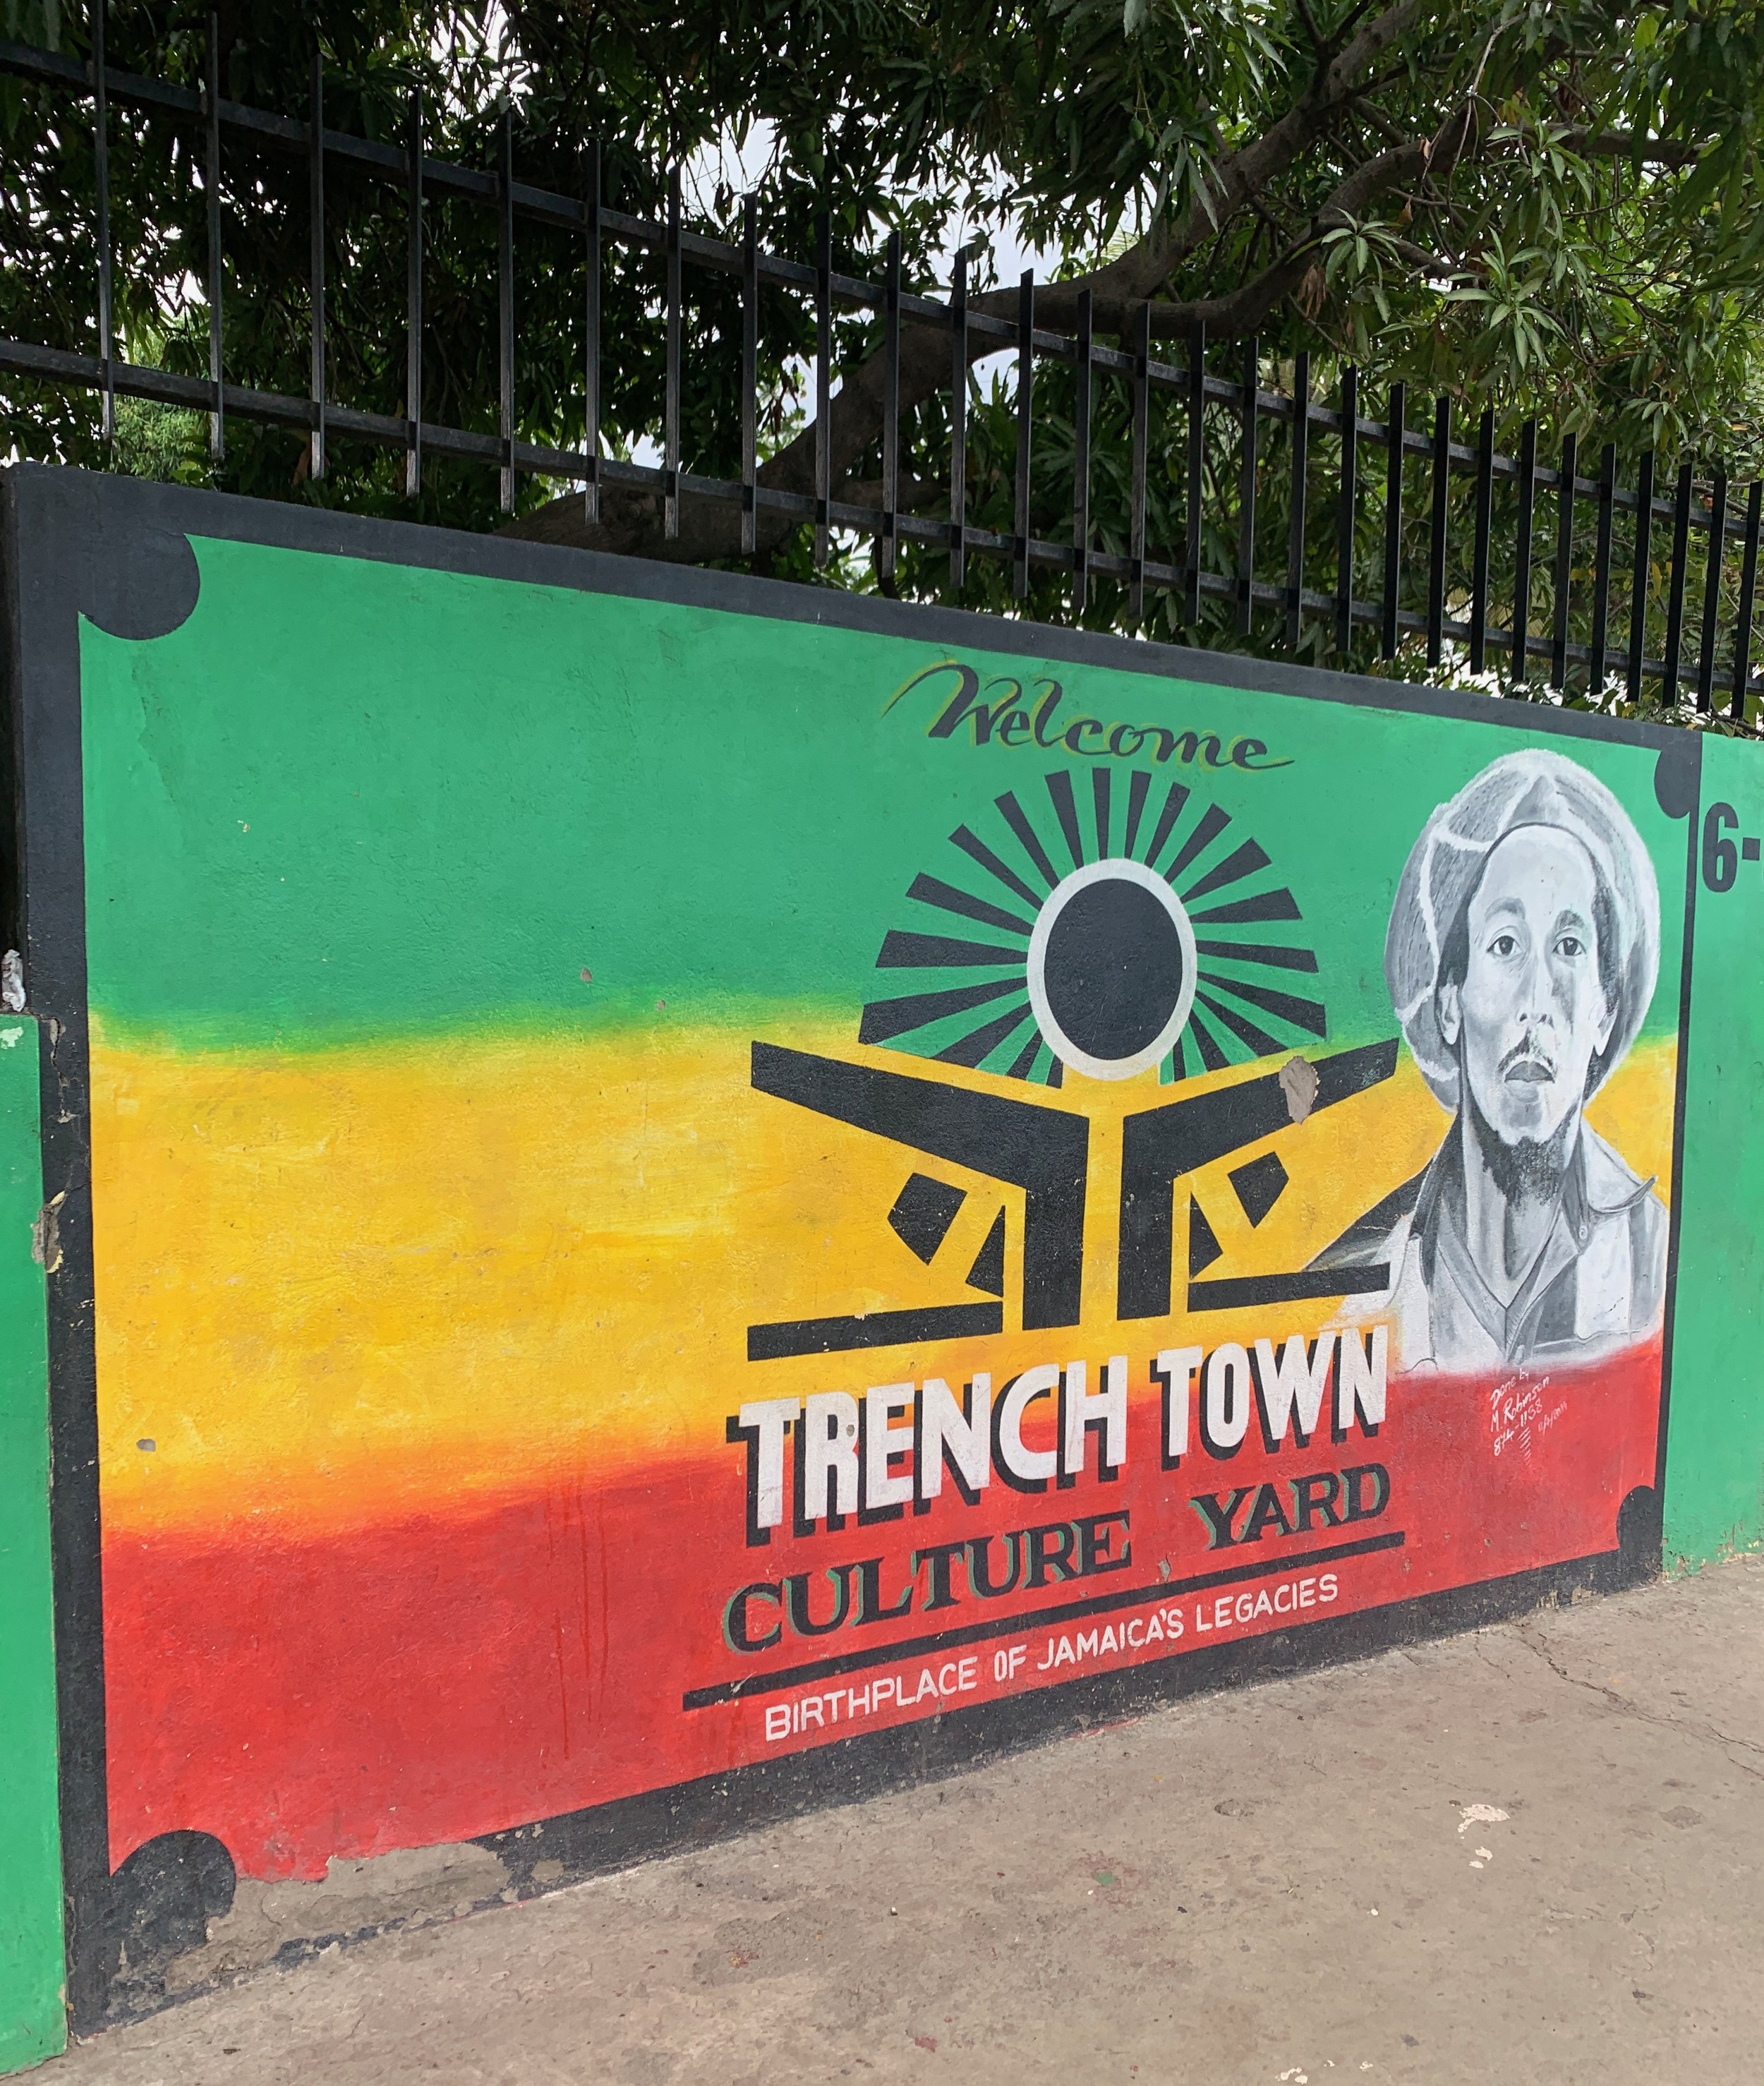  This was also my first visit to Trench Town, a gritty inner-city ‘hood where many of Jamaica’s talents - Bob Marley among them - got their start 